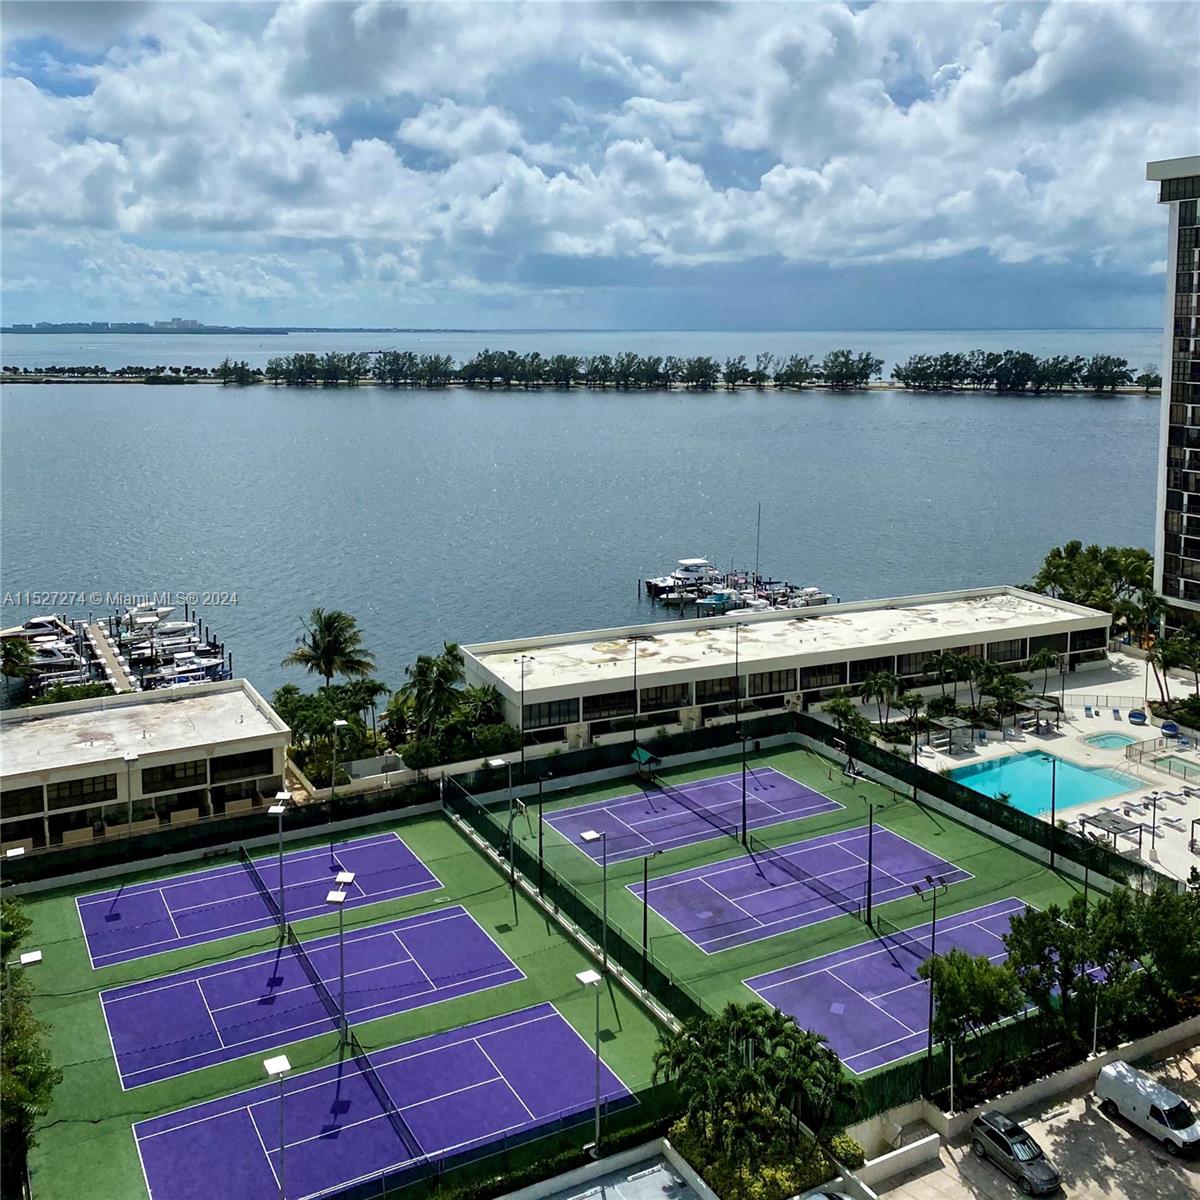 This unit has it all! Soothing view to the ocean and city, updated kitchen, plenty of storage, washer/dryer in unit. Building has great amenities, pools, tennis courts, gym, business center.  Living in Brickell is a lifestyle, walking distance to restaurants, shops, parks, grocery stores.